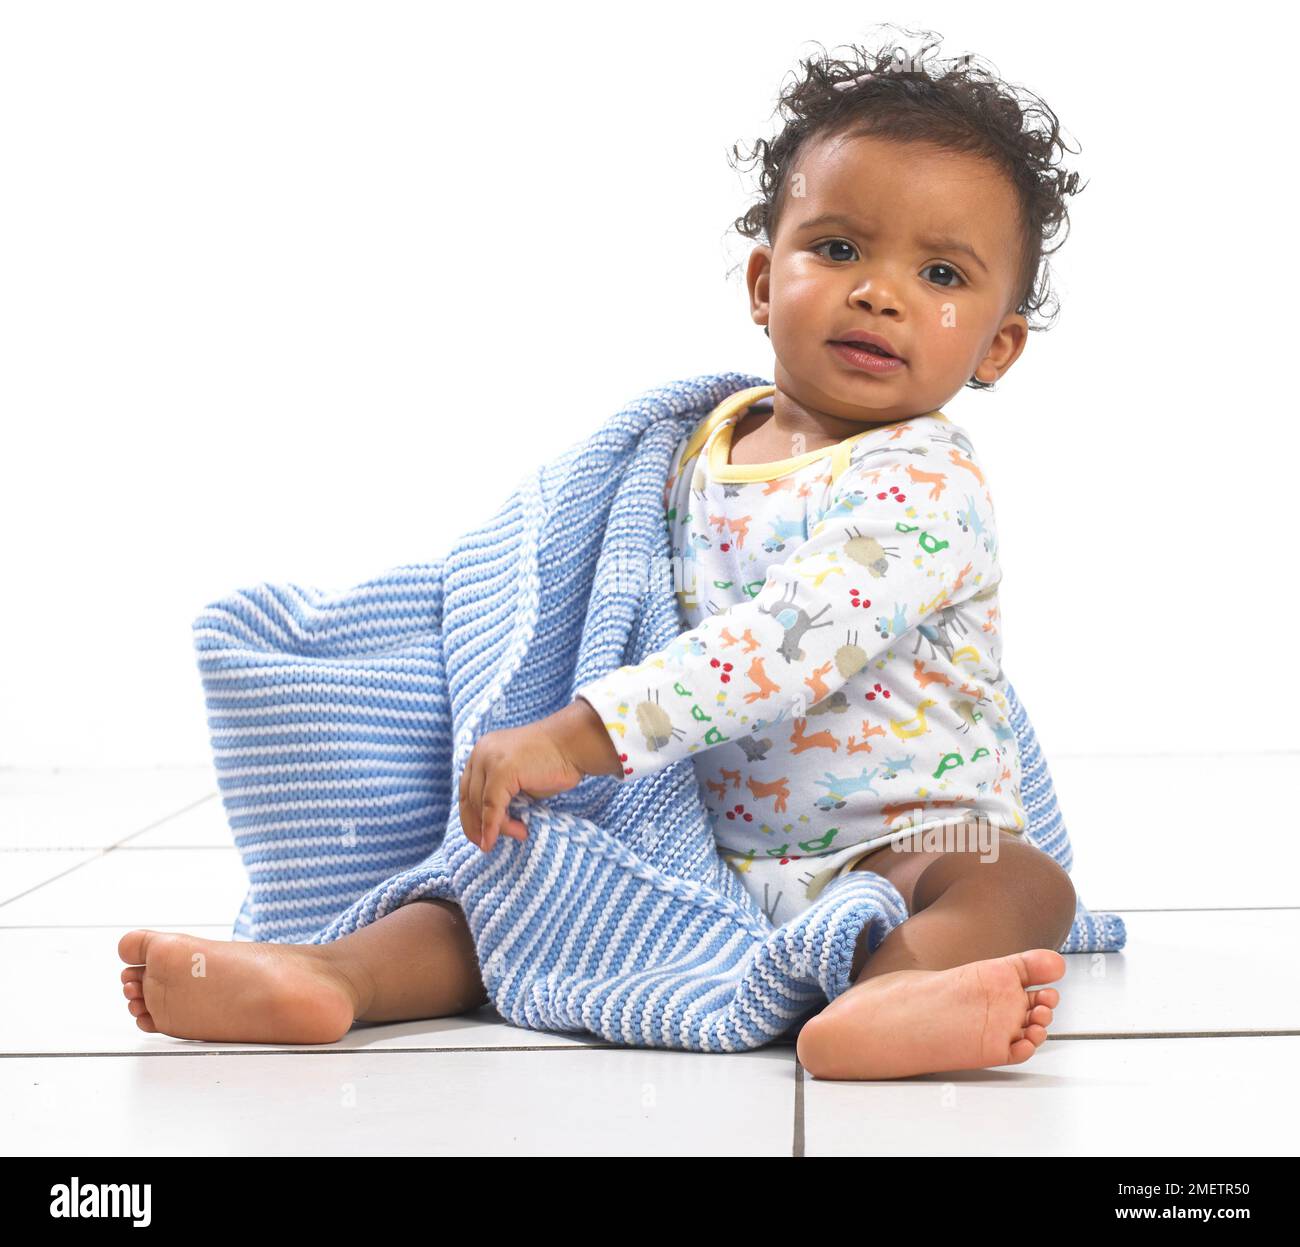 Girl sitting holding a kitted blanket around her, 18 months Stock Photo